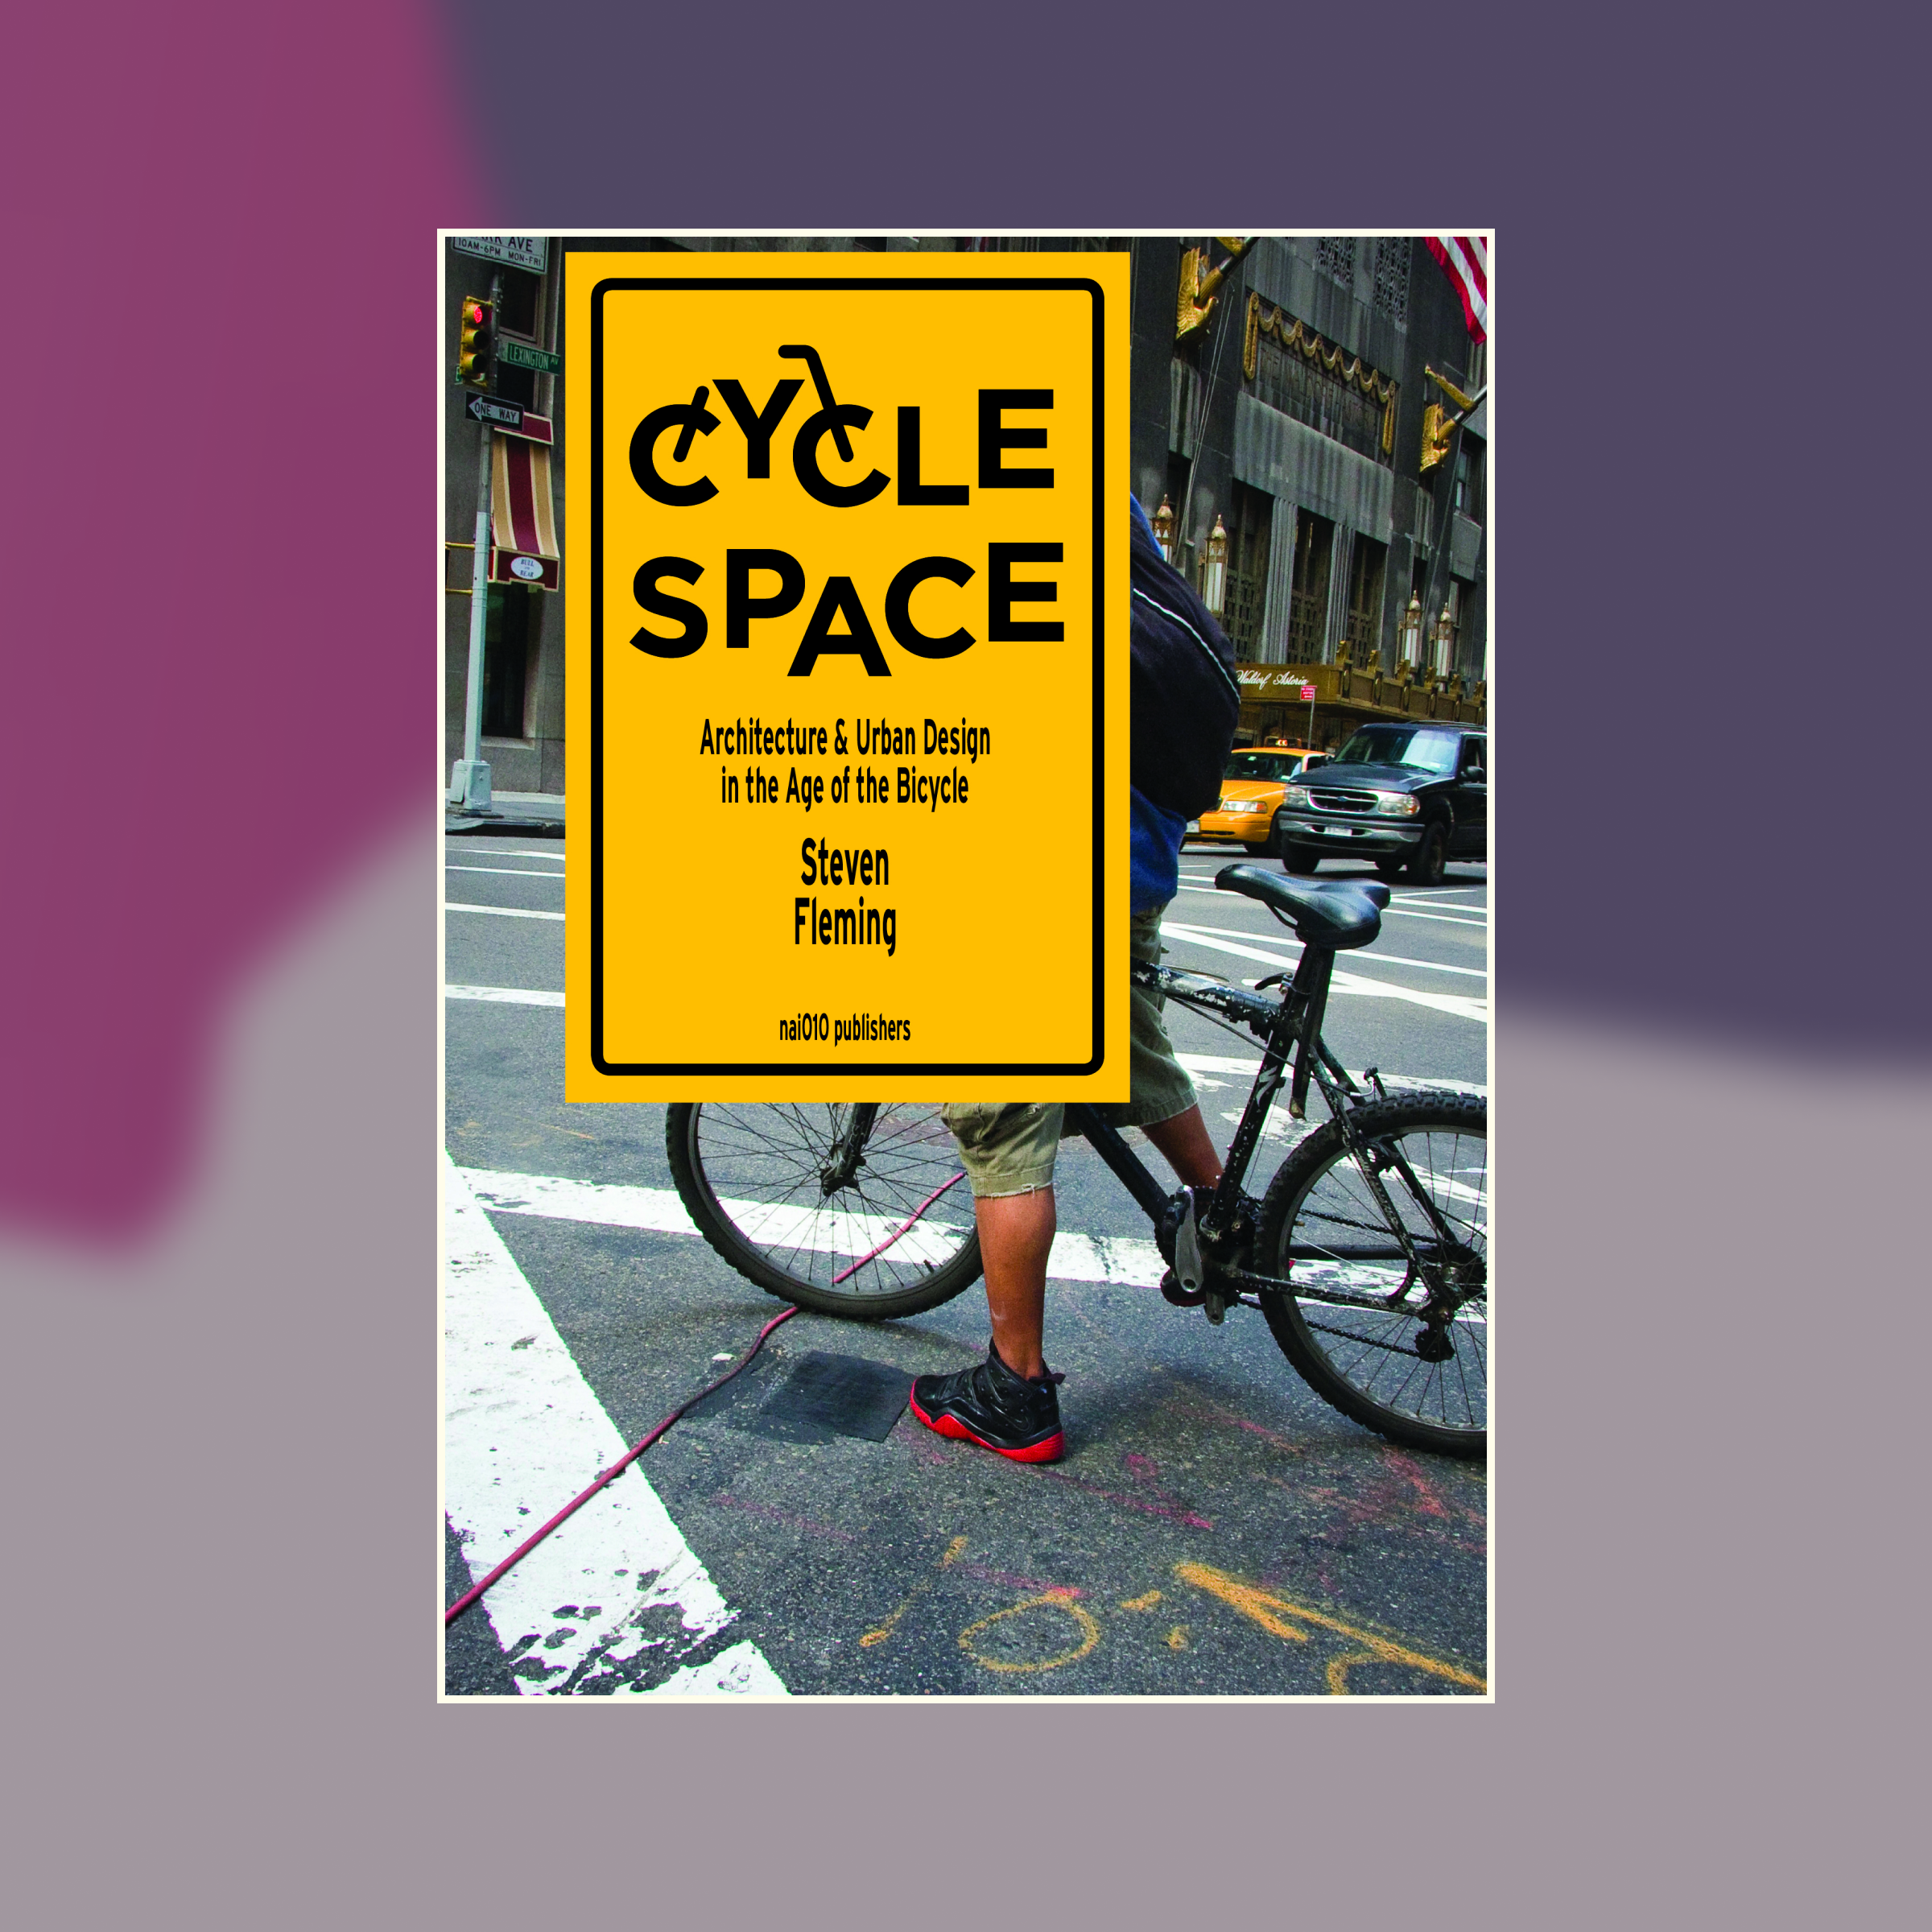 Book cover of Cycle Space against an abstract painted background